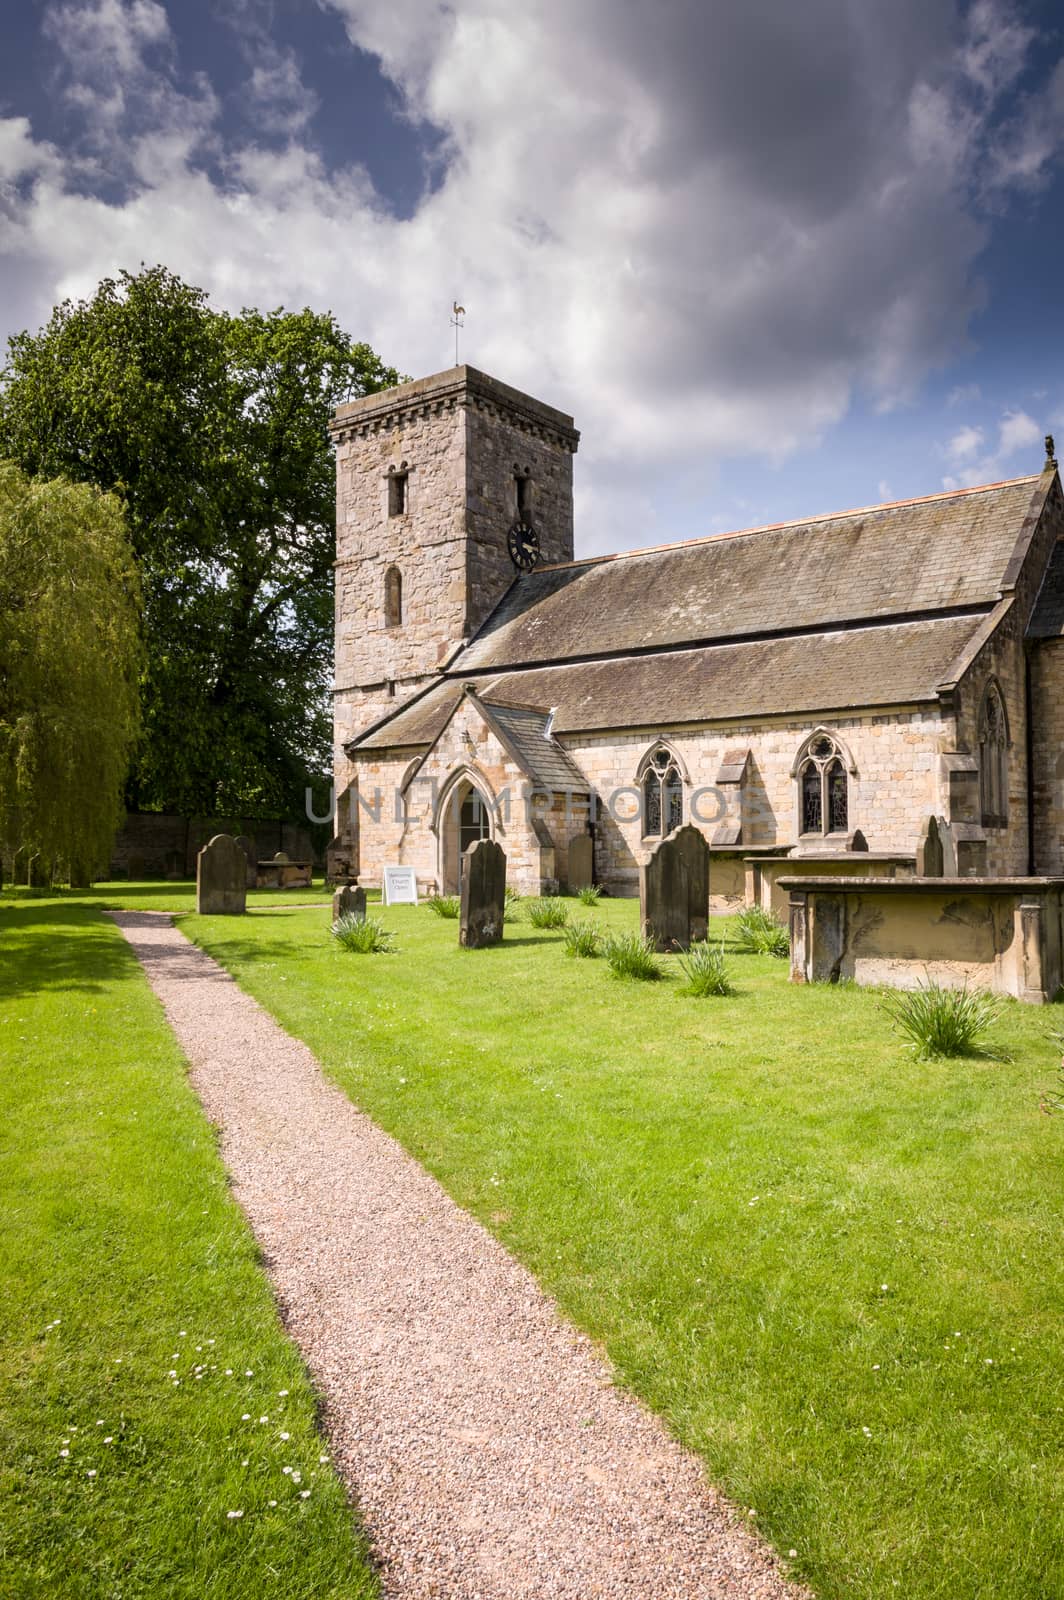 All Saints Church - Village of Hovingham, North Yorkshire, England, the home of the Worsley family and the childhood home of the Duchess of Kent